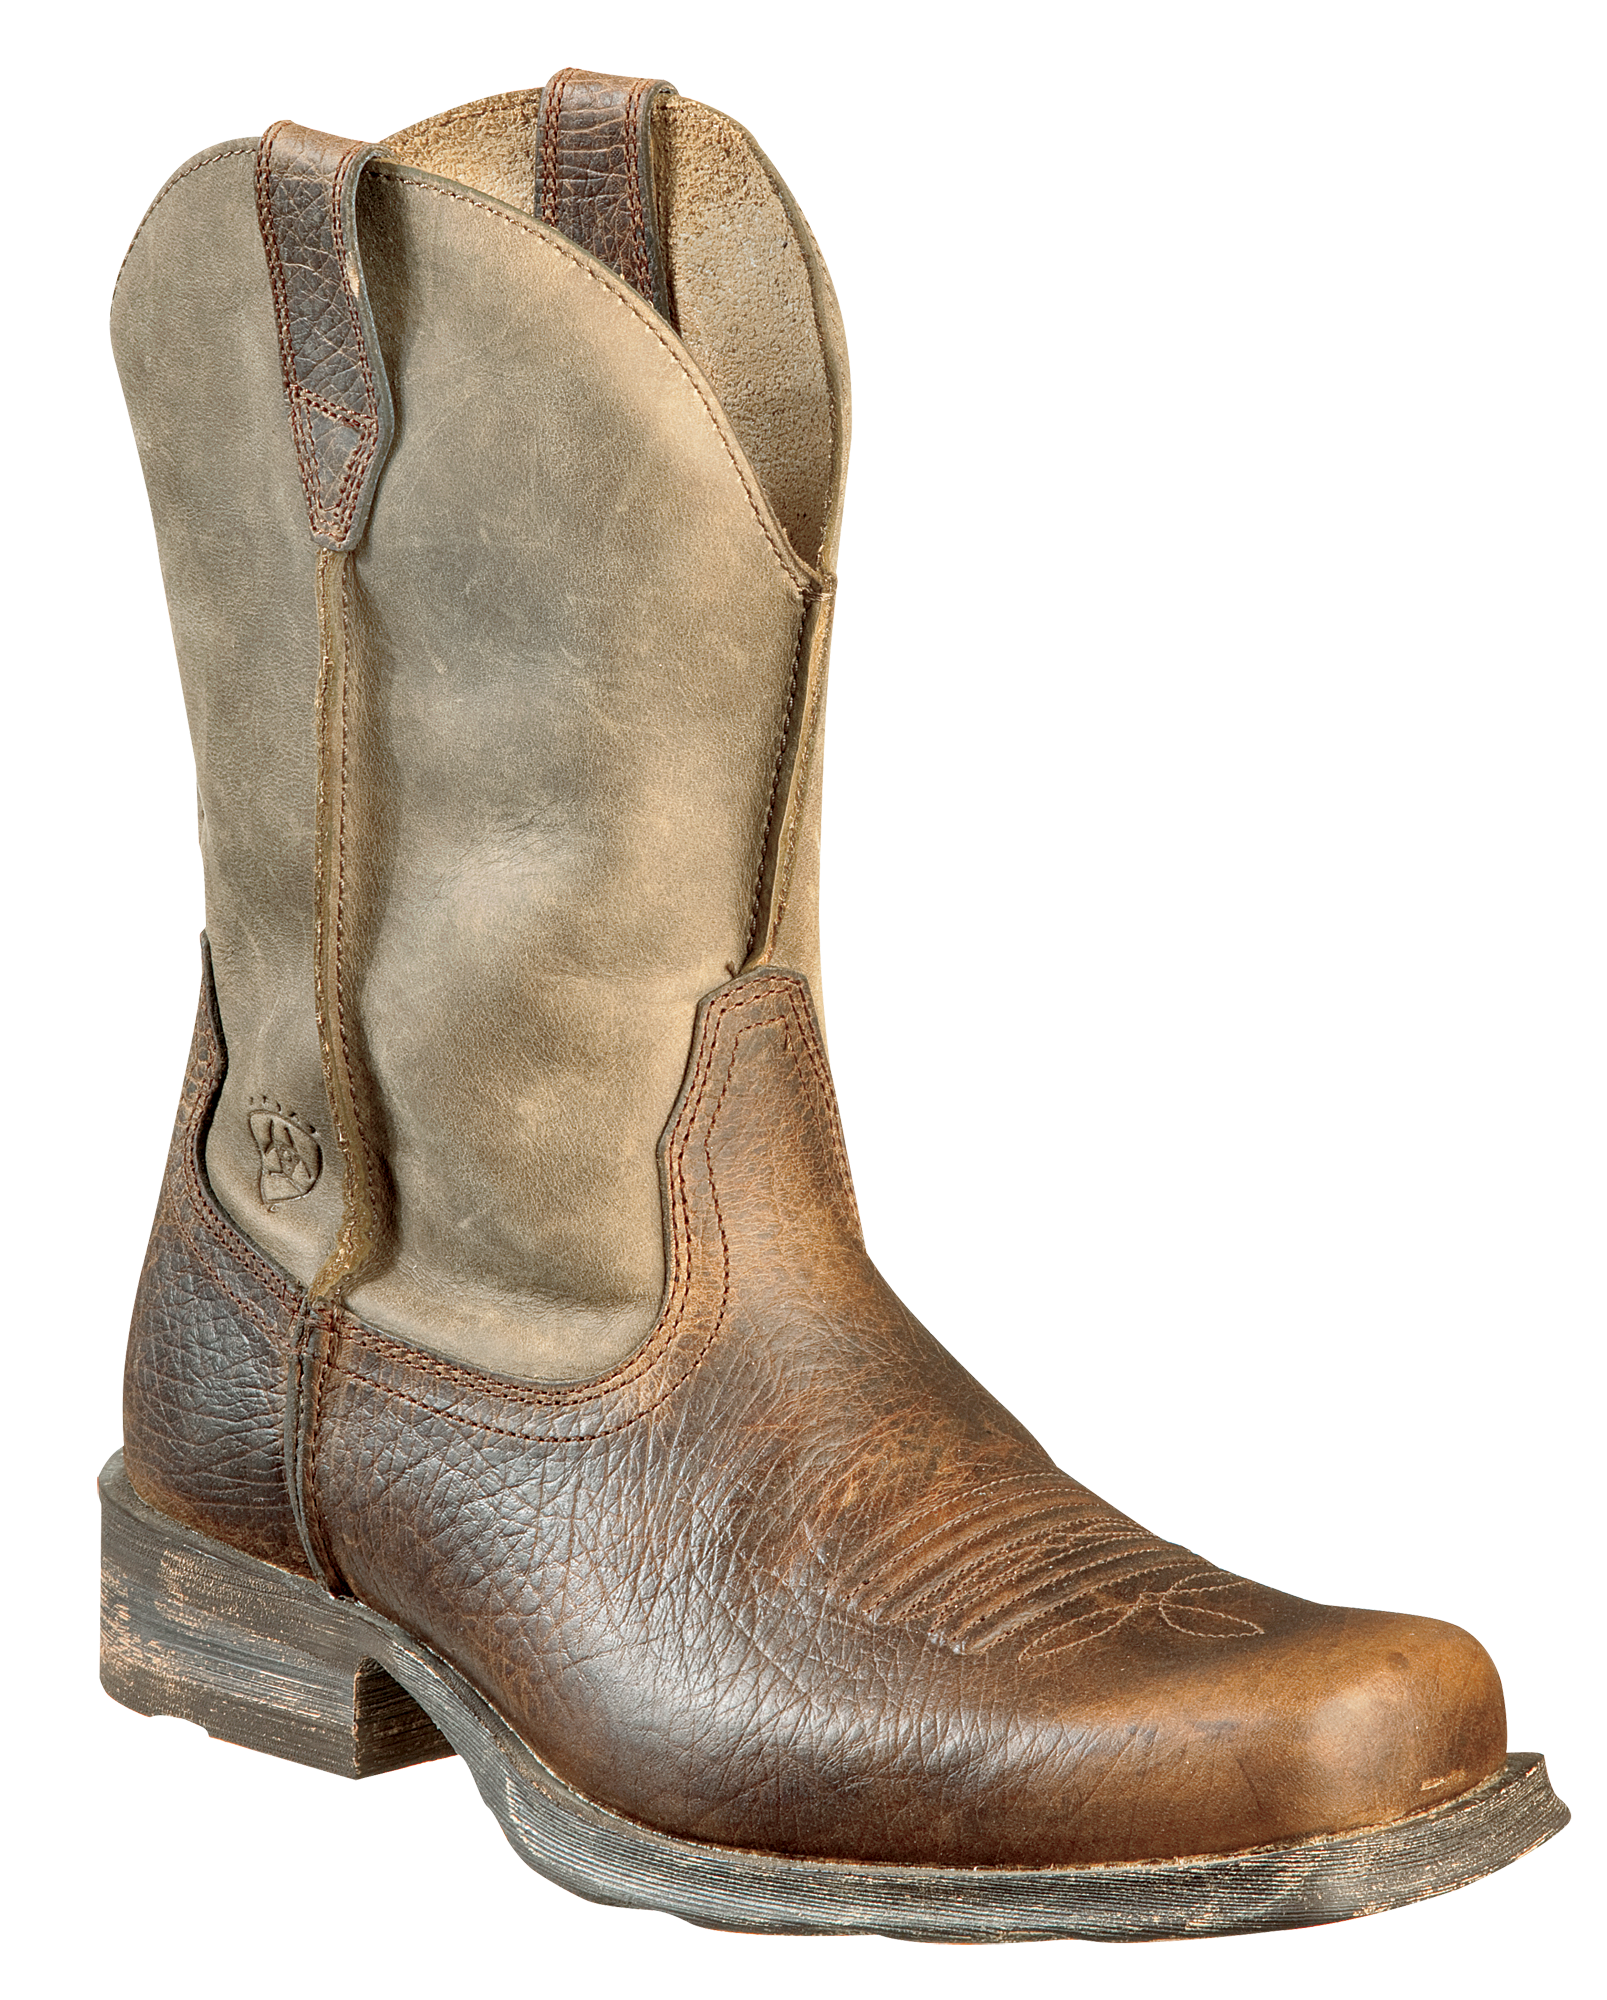 Men's Sport Rambler Western Boots in Bartop Brown Leather, Size: 7.5 D /  Medium by Ariat